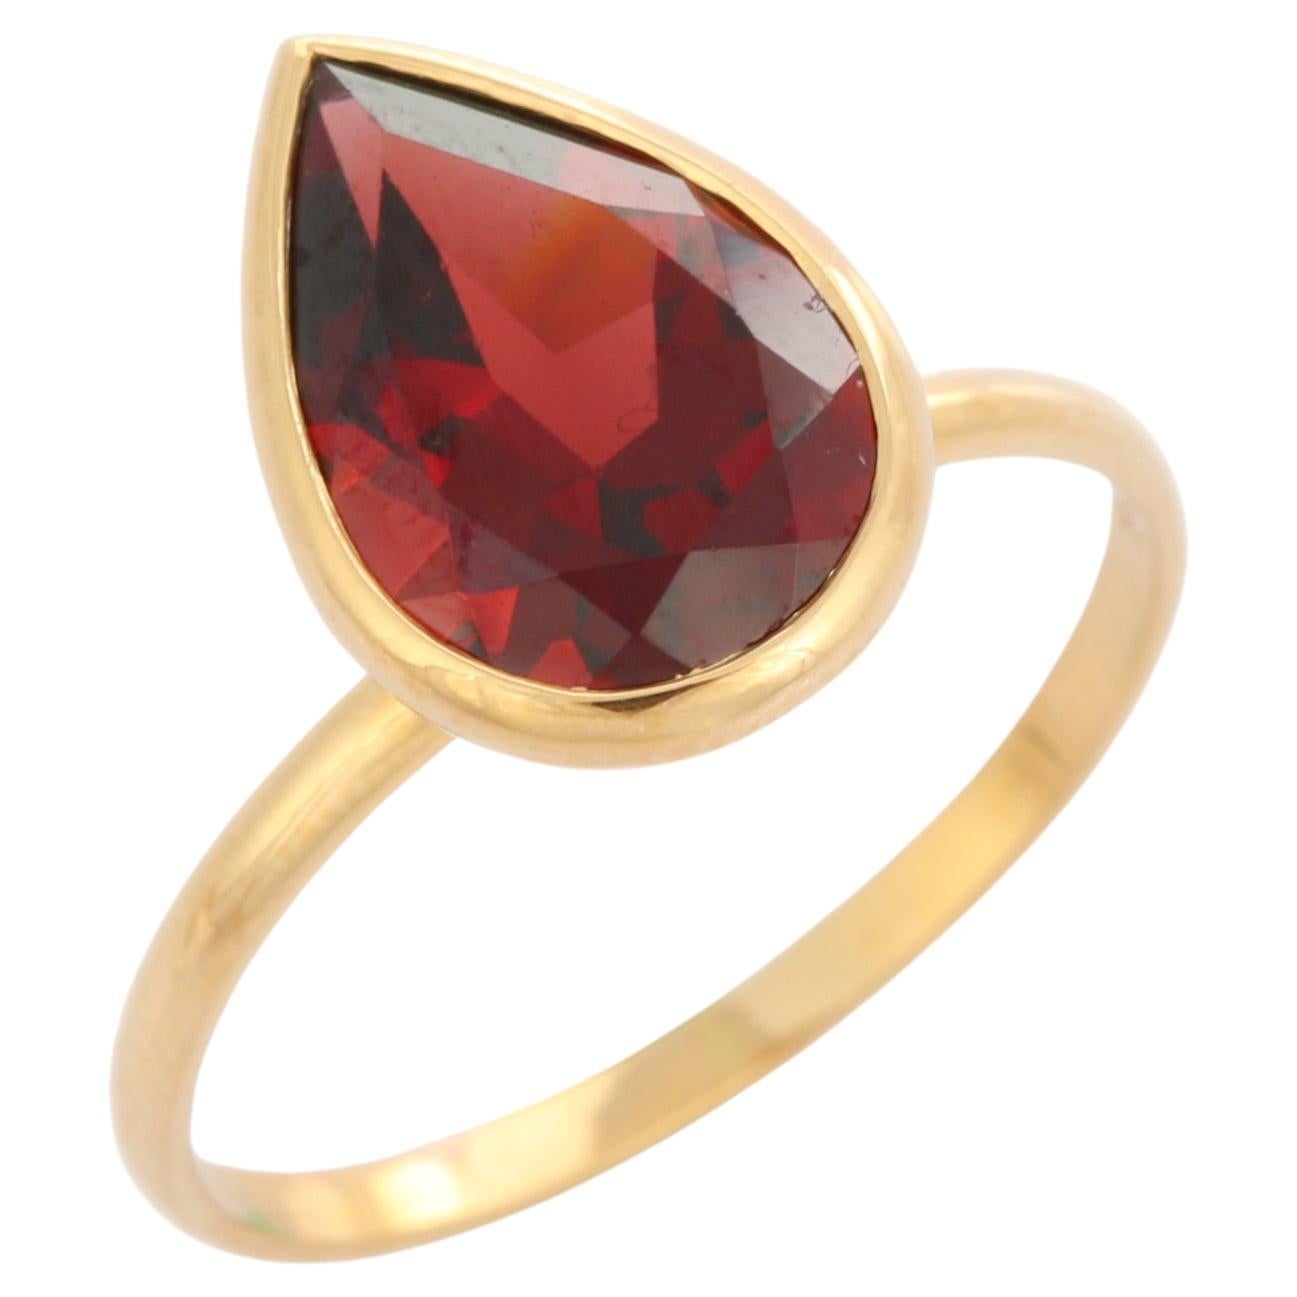 For Sale:  3.5 Carat Pear Cut Garnet Cocktail Ring in 18K Yellow Gold